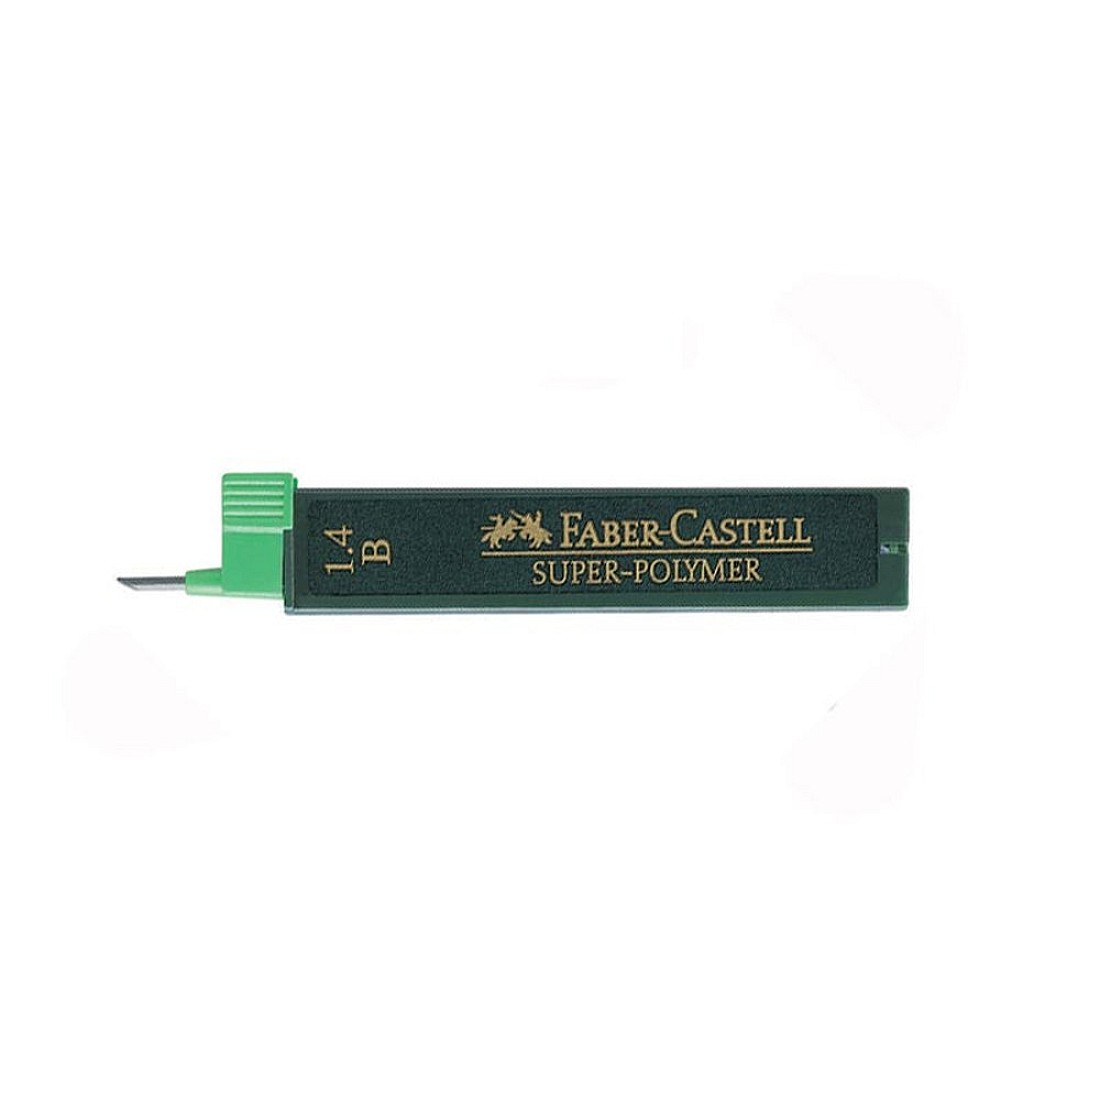 Faber-Castell Pencil Leads (1.4mm)